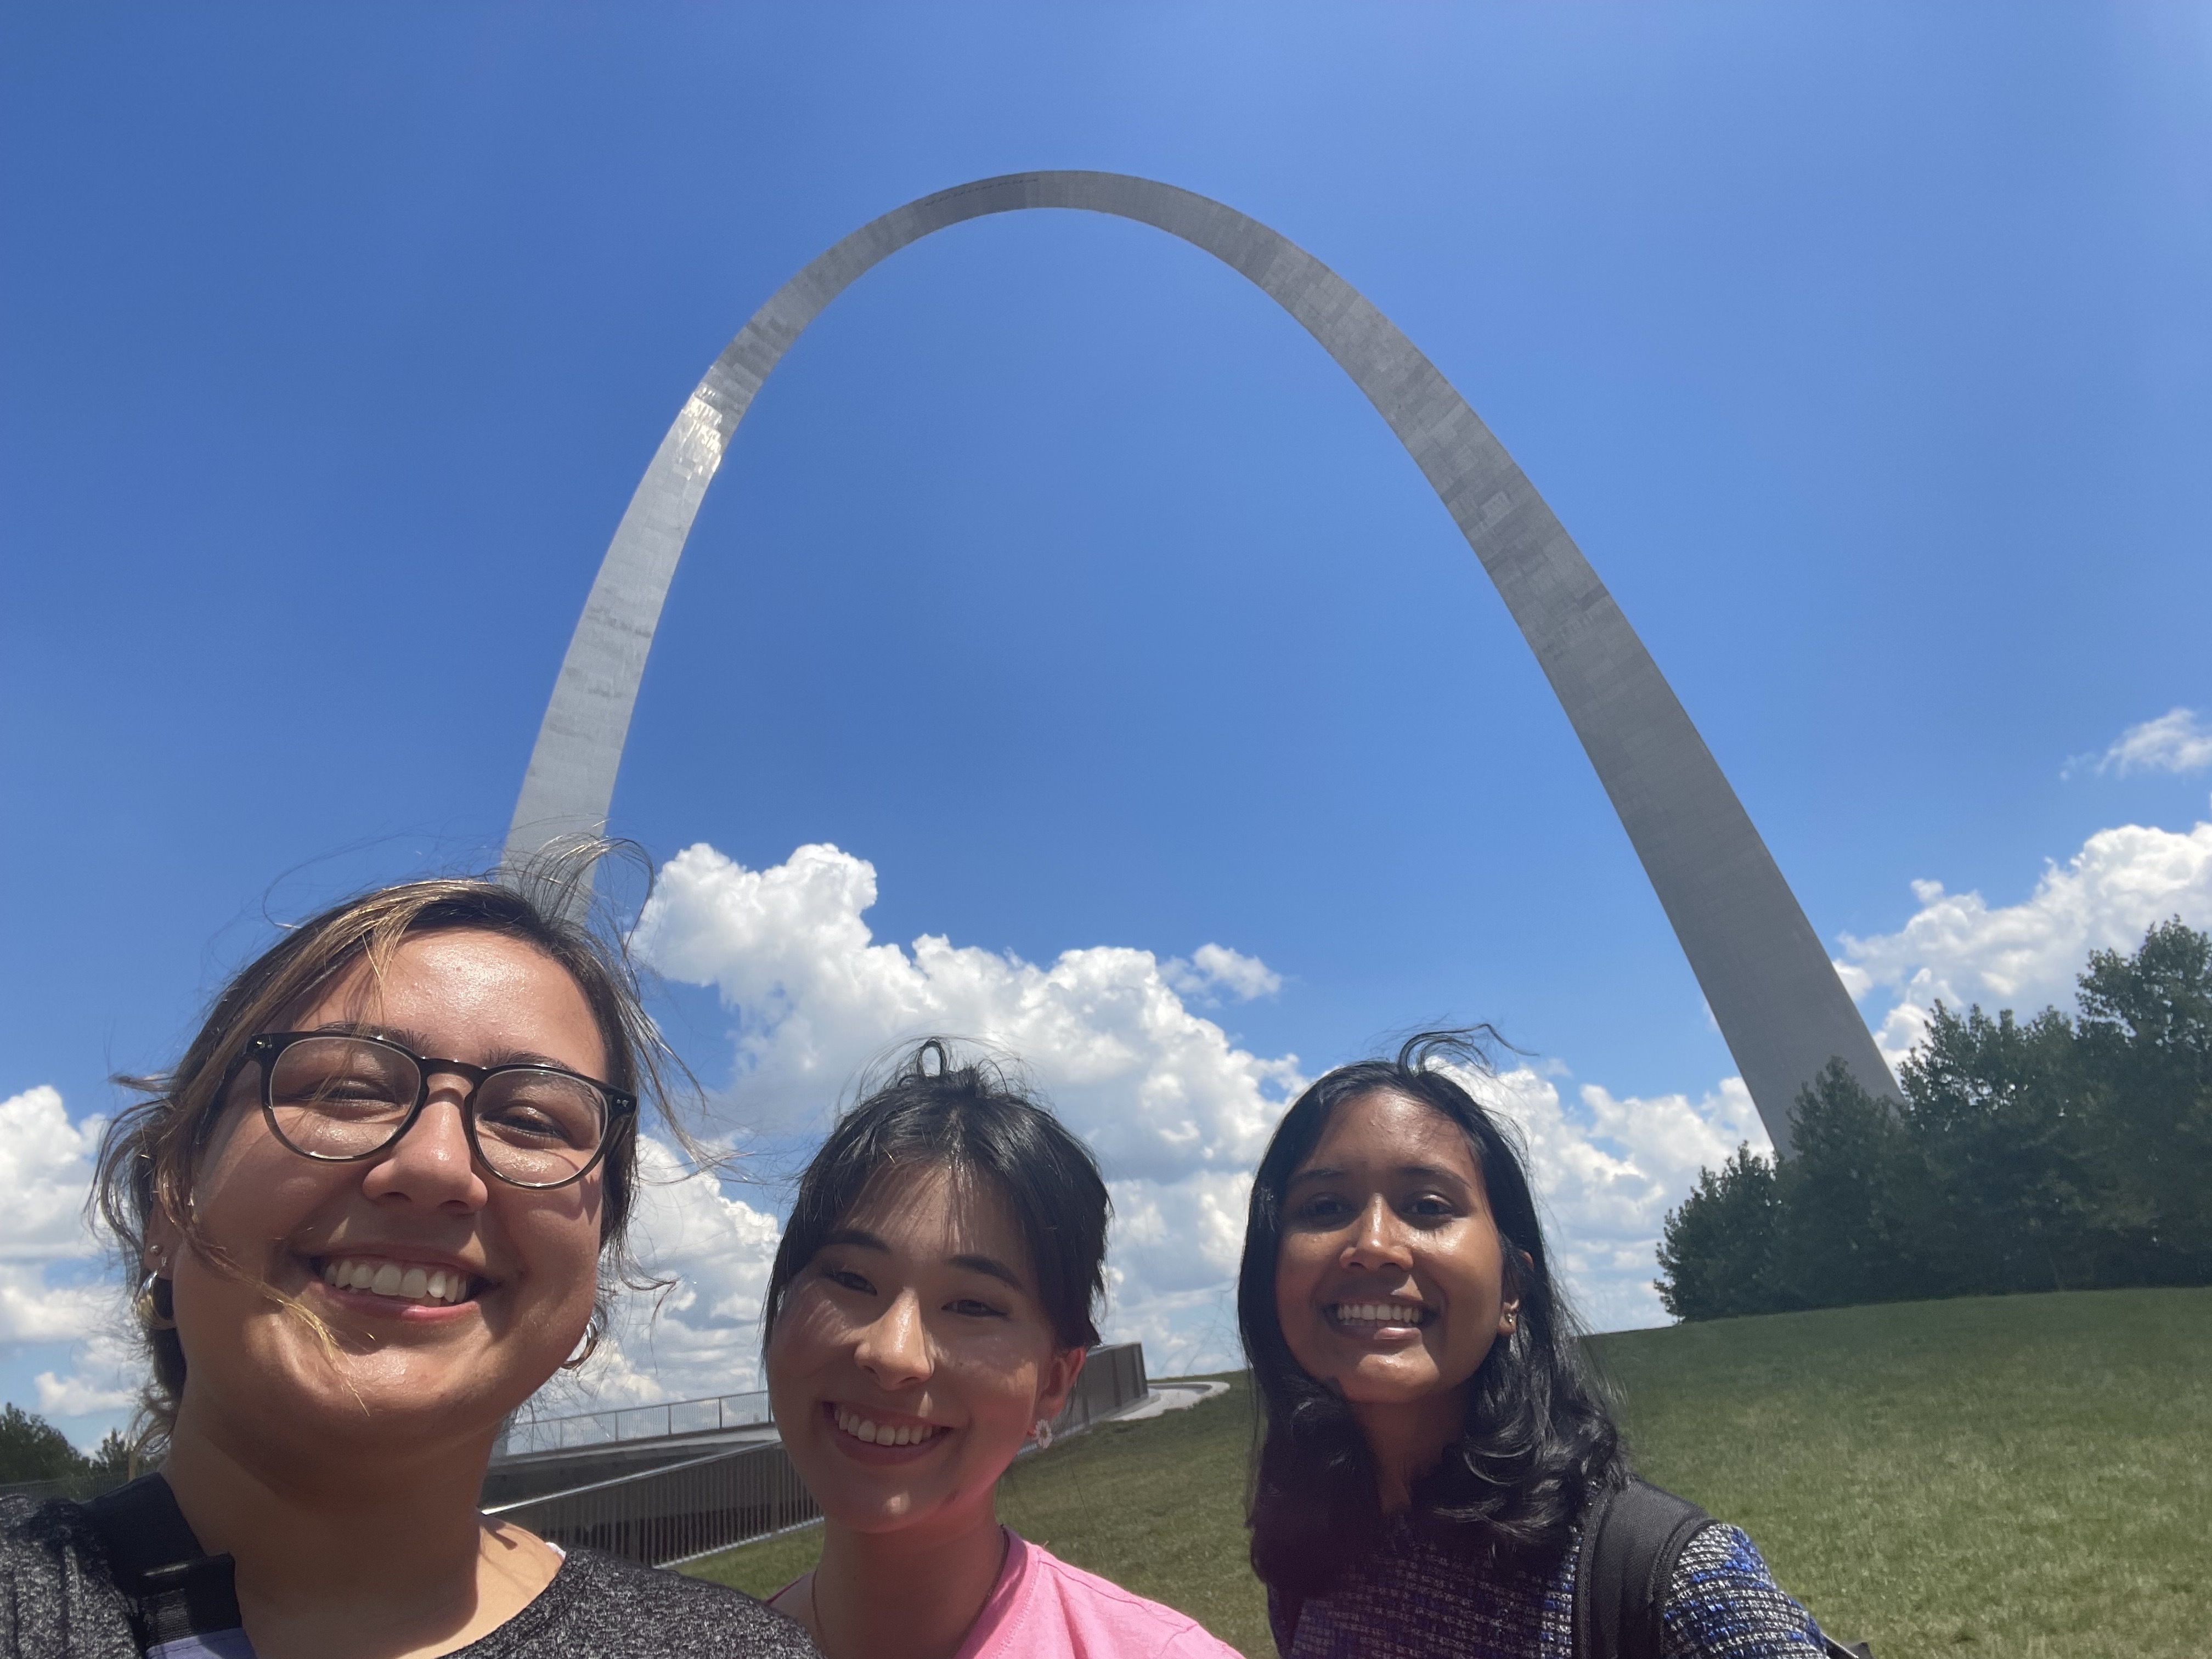 from left to right, selfie of Nicole, Elisa, and me (Ananya) in front of the metal St. Louis Gateway Arch with blue sky and clouds in the background